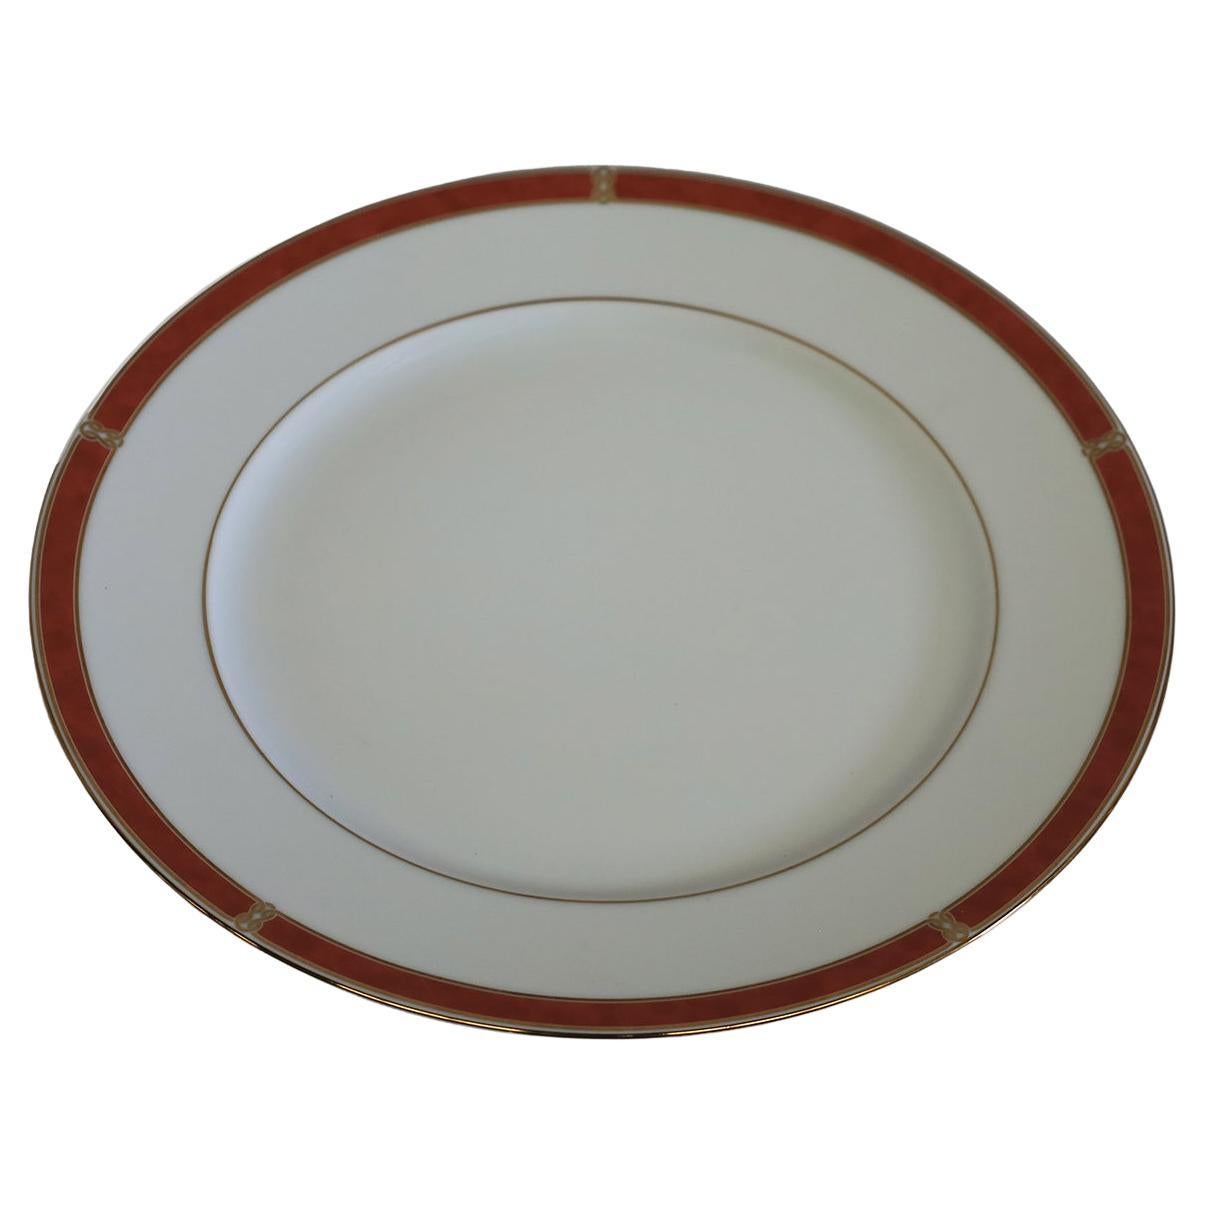 Set of 5 Oceana Rouge Dinner Plates excellent condition.